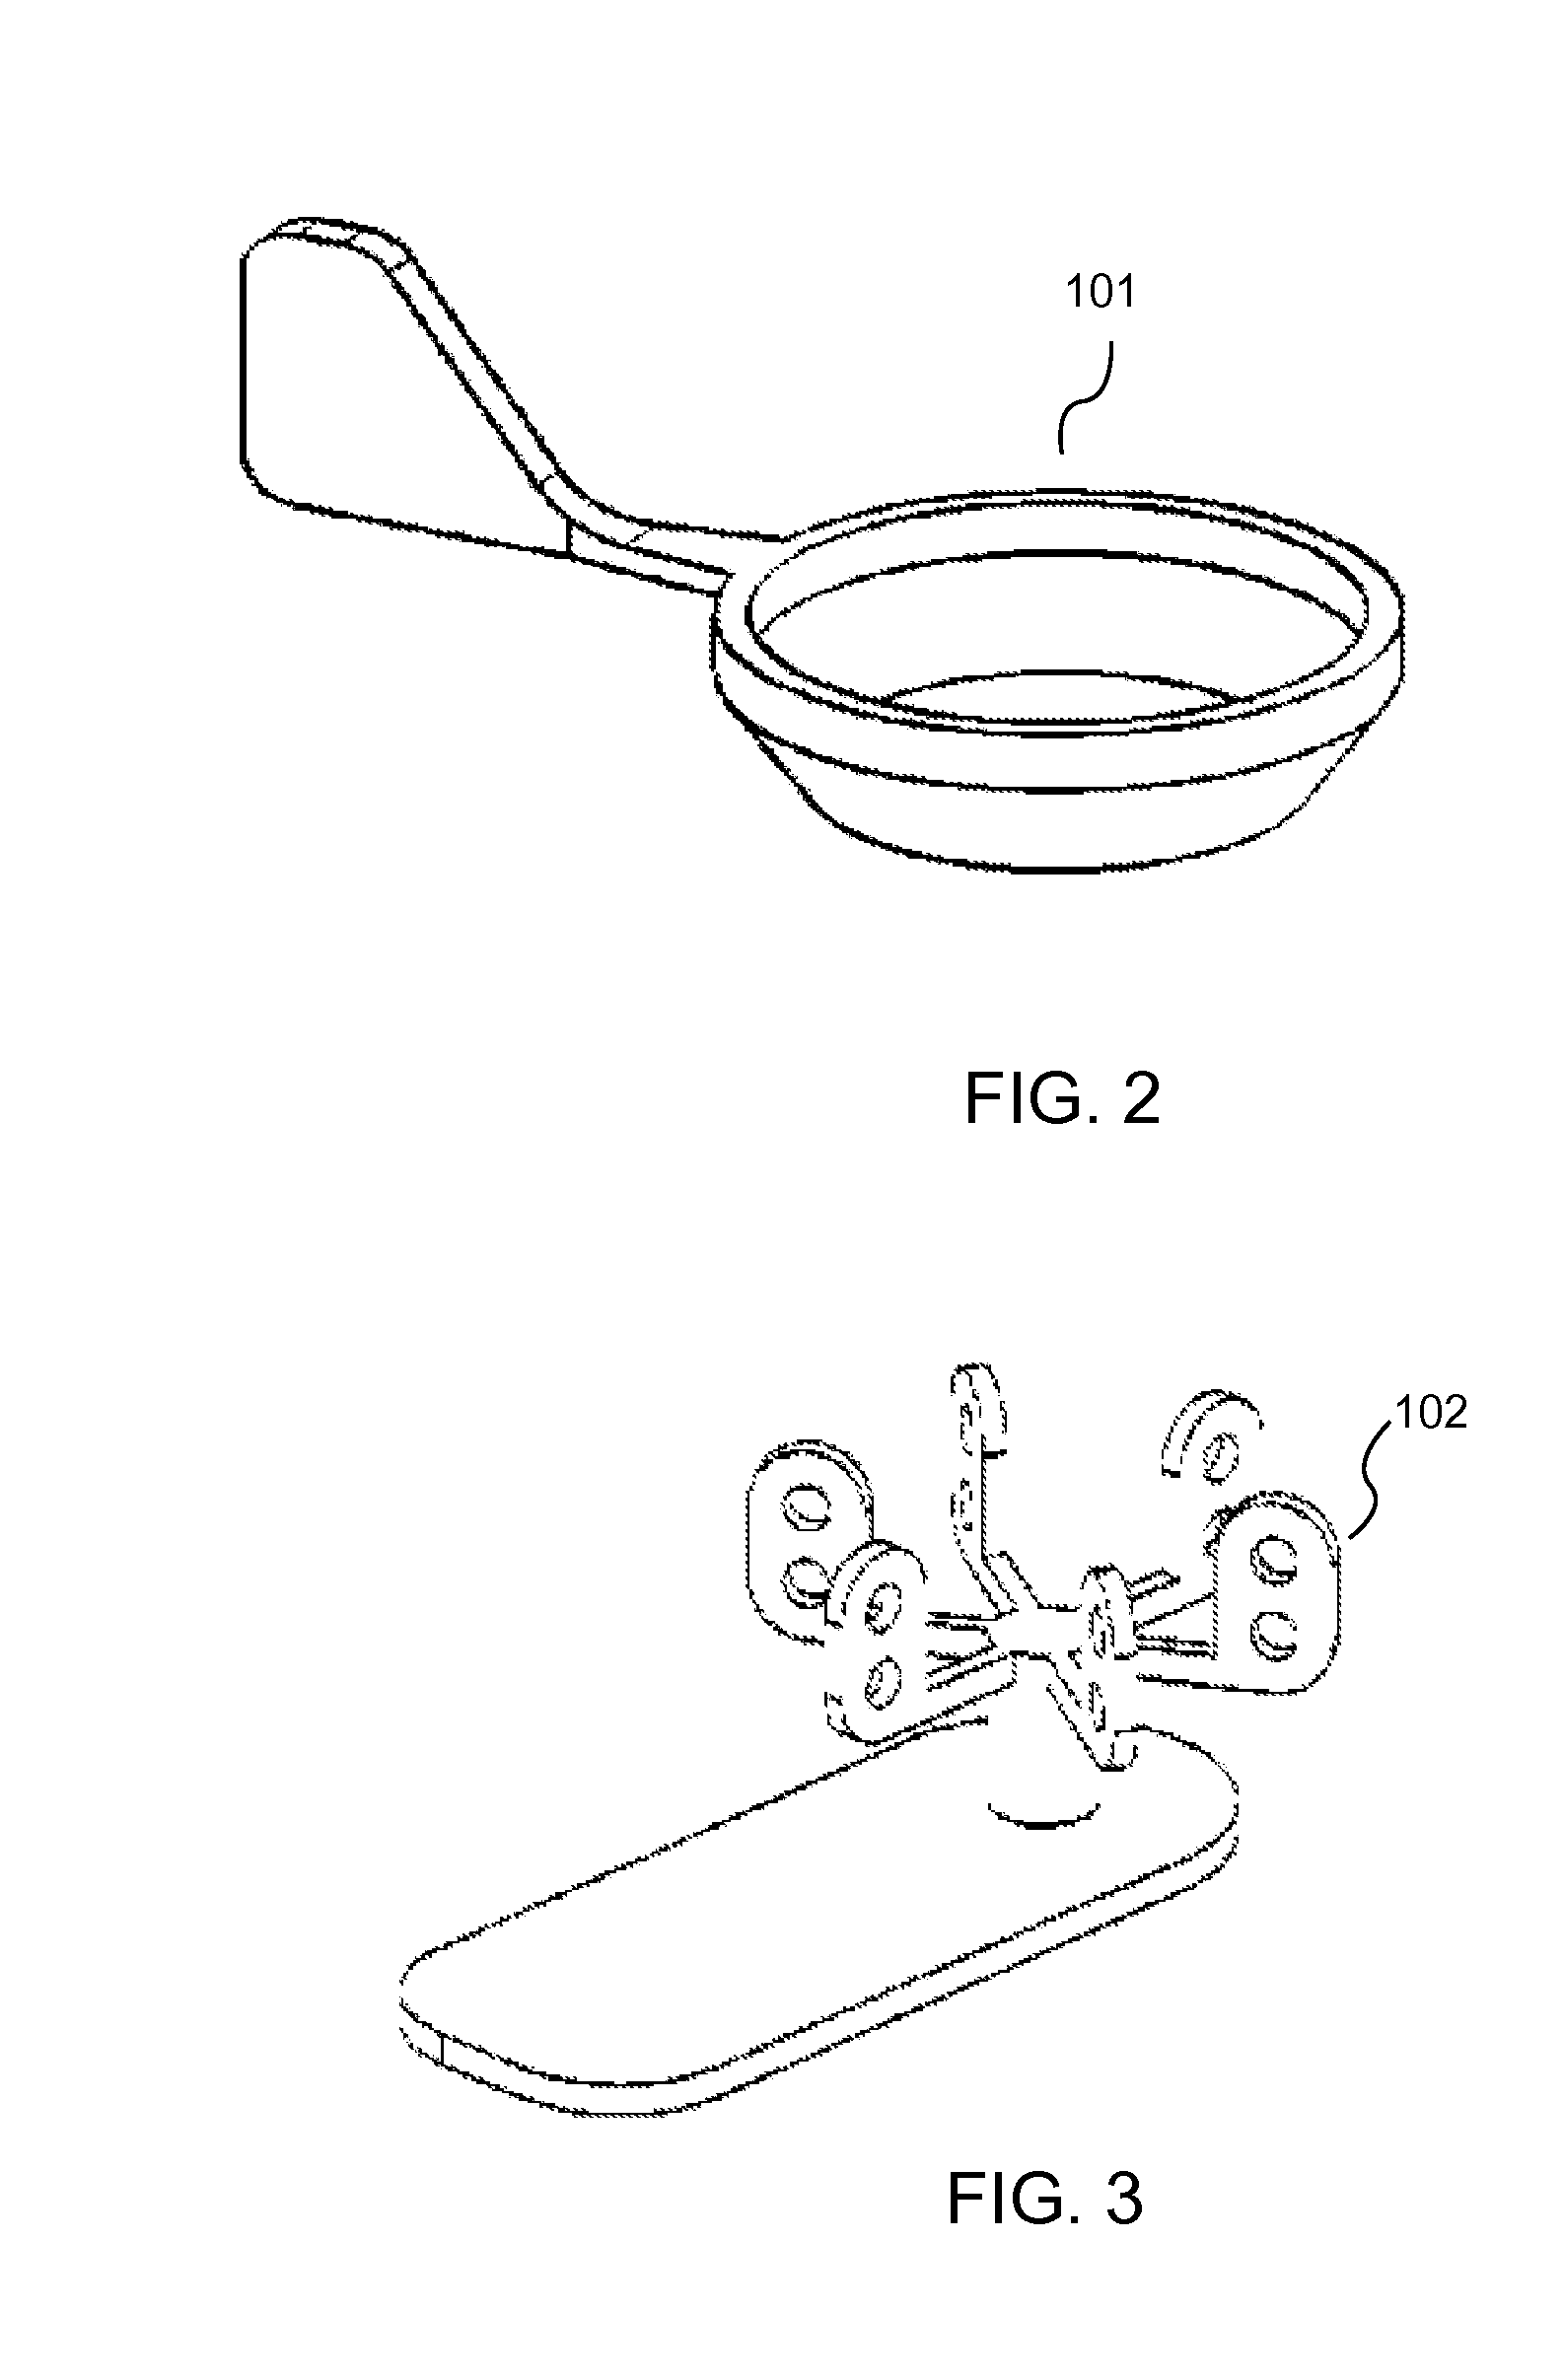 Device and Method for Performing Blood Thromboelastographic Assays by Magnetic Sensing